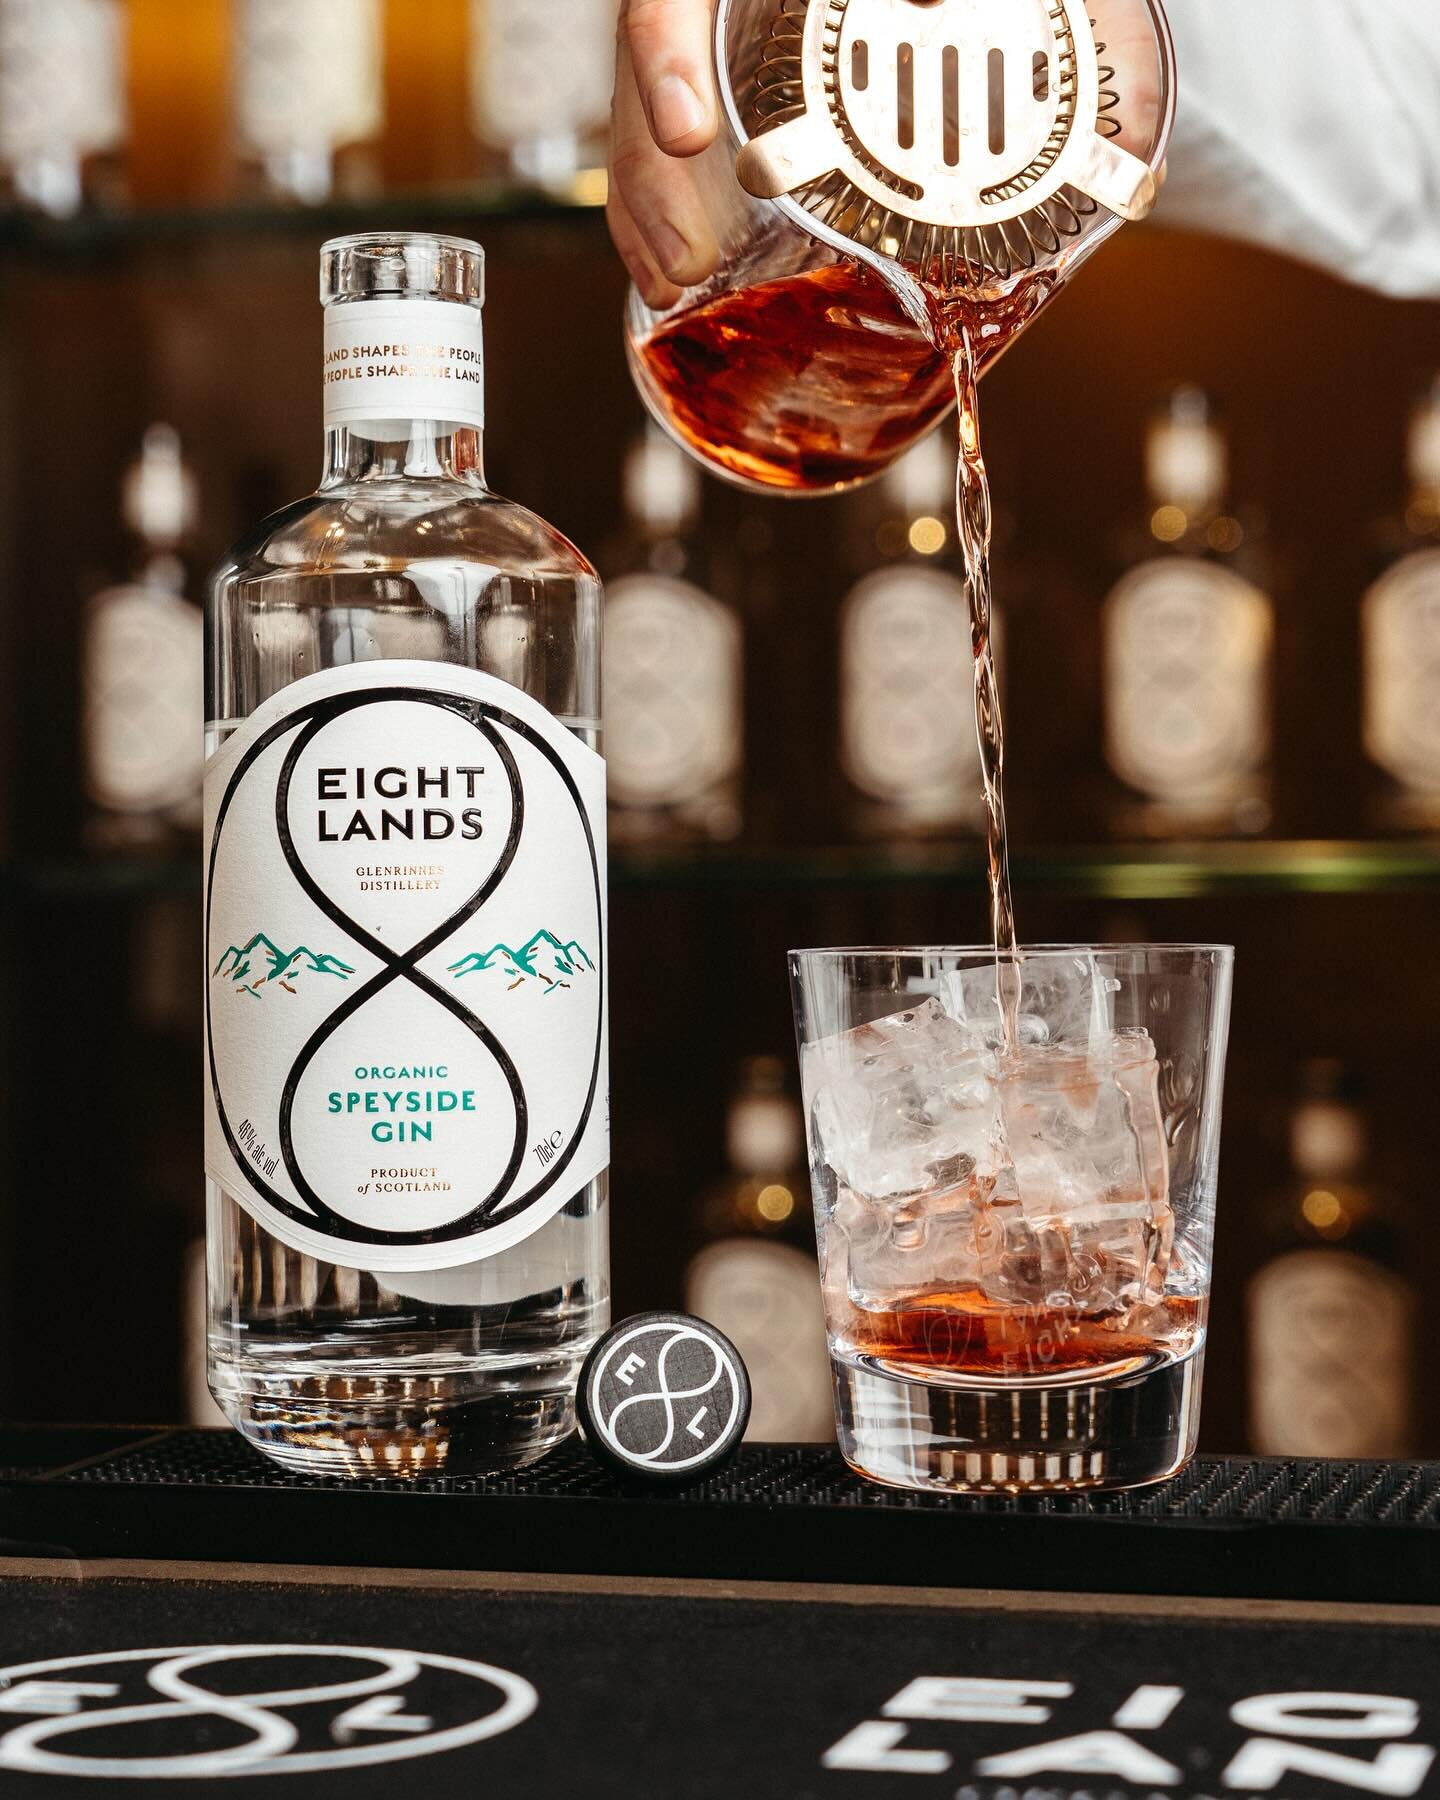 Mid-afternoon. Late January. Definitely time for a well-deserved Negroni, preferably made with Eight Lands&rsquo; organic gin. We designed it as a contemporary-classic London Dry to enjoy in your favourite cocktail, testing each recipe with bartender